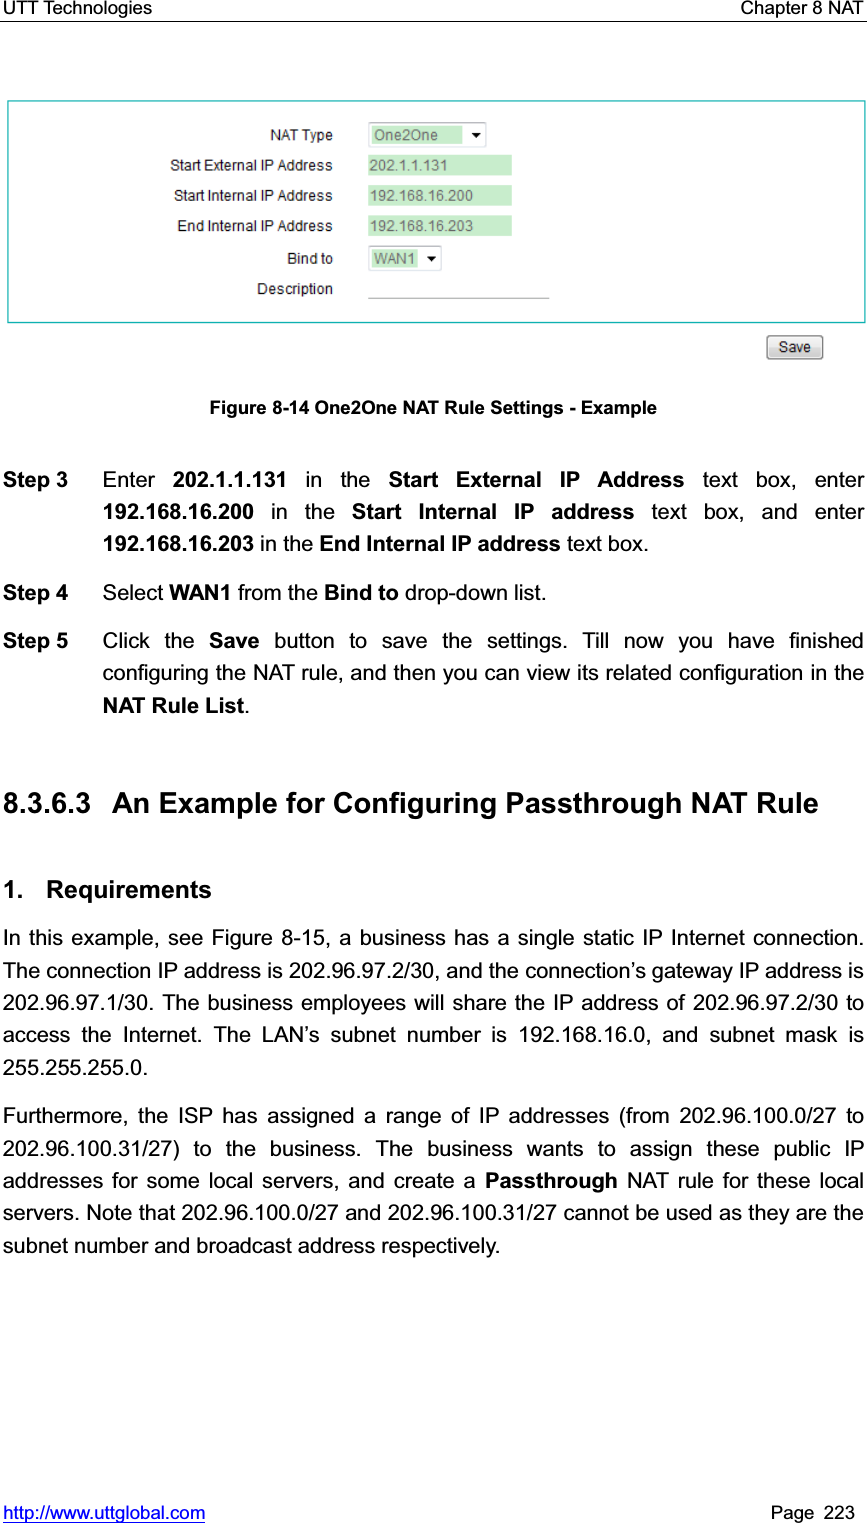 UTT Technologies    Chapter 8 NAT   http://www.uttglobal.com Page 223 Figure 8-14 One2One NAT Rule Settings - Example Step 3  Enter 202.1.1.131 in the Start External IP Address text box, enter 192.168.16.200 in the Start Internal IP address text box, and enter 192.168.16.203 in the End Internal IP address text box. Step 4  Select WAN1 from the Bind to drop-down list. Step 5  Click the Save button to save the settings. Till now you have finished configuring the NAT rule, and then you can view its related configuration in theNAT Rule List.8.3.6.3  An Example for Configuring Passthrough NAT Rule 1. Requirements In this example, see Figure 8-15, a business has a single static IP Internet connection. The connection IP address is 202.96.97.2/30, and the FRQQHFWLRQ¶V gateway IP address is 202.96.97.1/30. The business employees will share the IP address of 202.96.97.2/30 to access the Internet. The LAN¶s subnet number is 192.168.16.0, and subnet mask is 255.255.255.0. Furthermore, the ISP has assigned a range of IP addresses (from 202.96.100.0/27 to 202.96.100.31/27) to the business. The business wants to assign these public IP addresses for some local servers, and create a Passthrough NAT rule for these local servers. Note that 202.96.100.0/27 and 202.96.100.31/27 cannot be used as they are the subnet number and broadcast address respectively. 